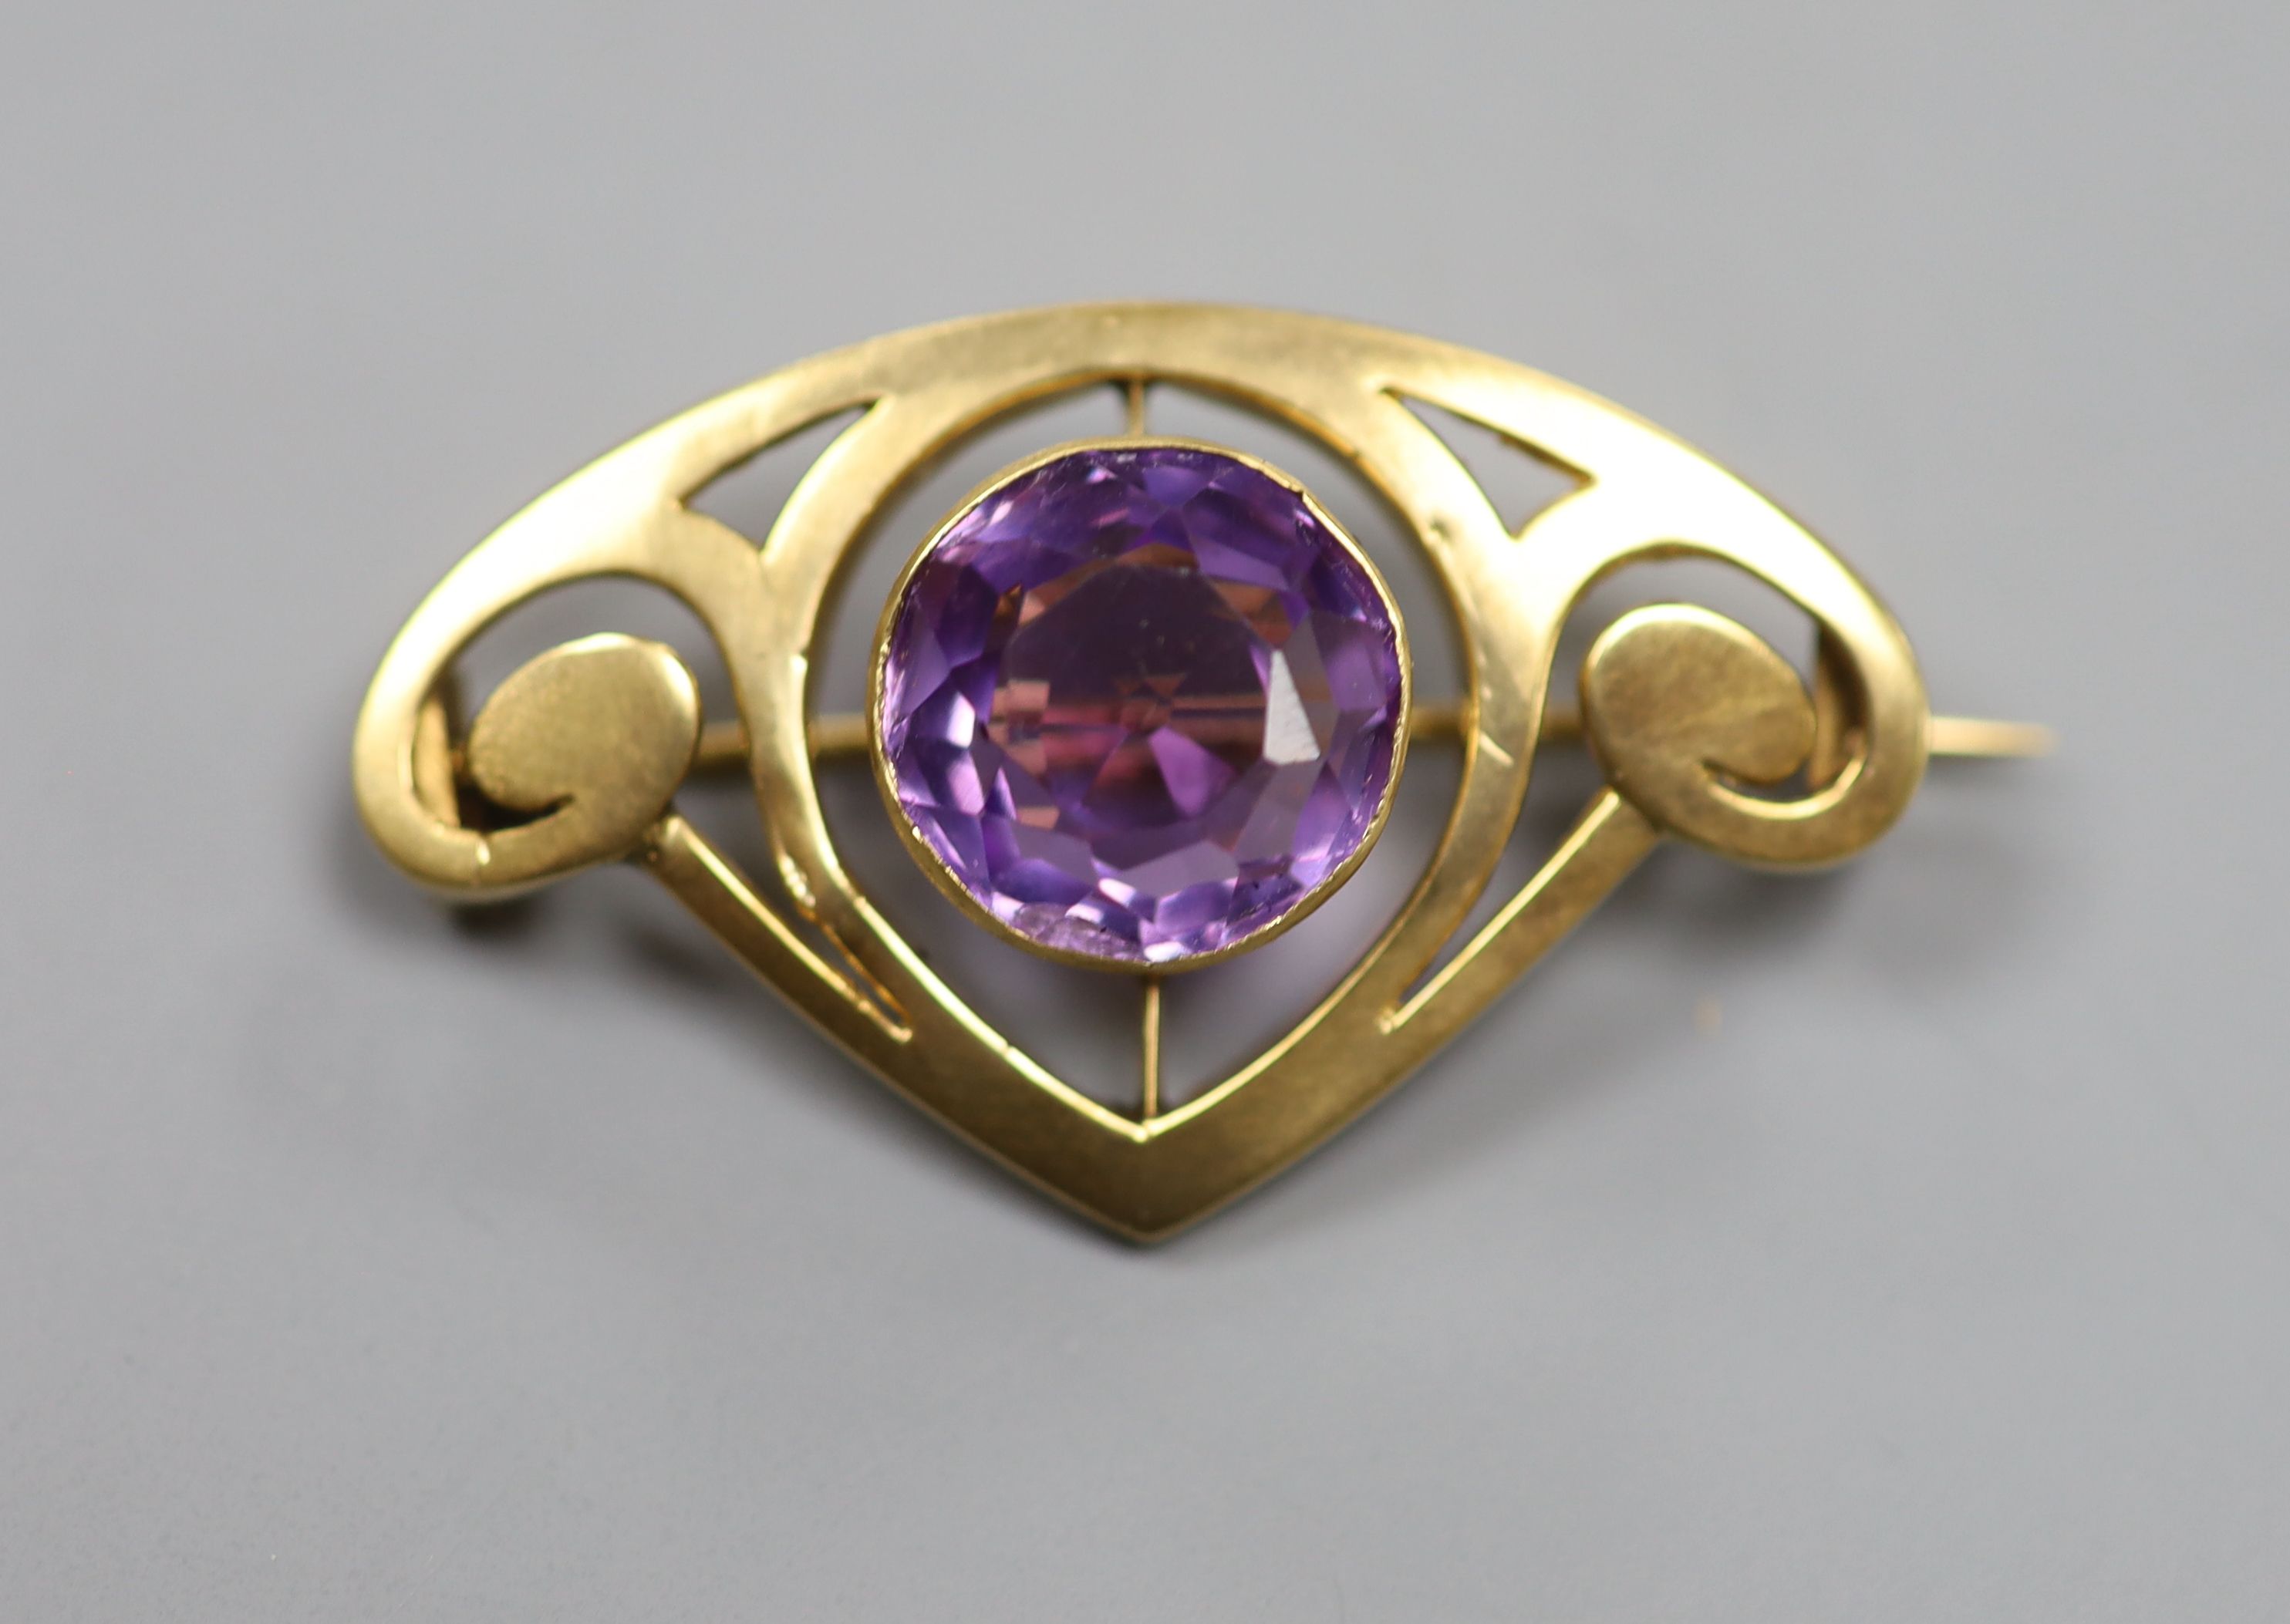 An early 20th century Art Nouveau yellow metal and amethyst set stylised brooch